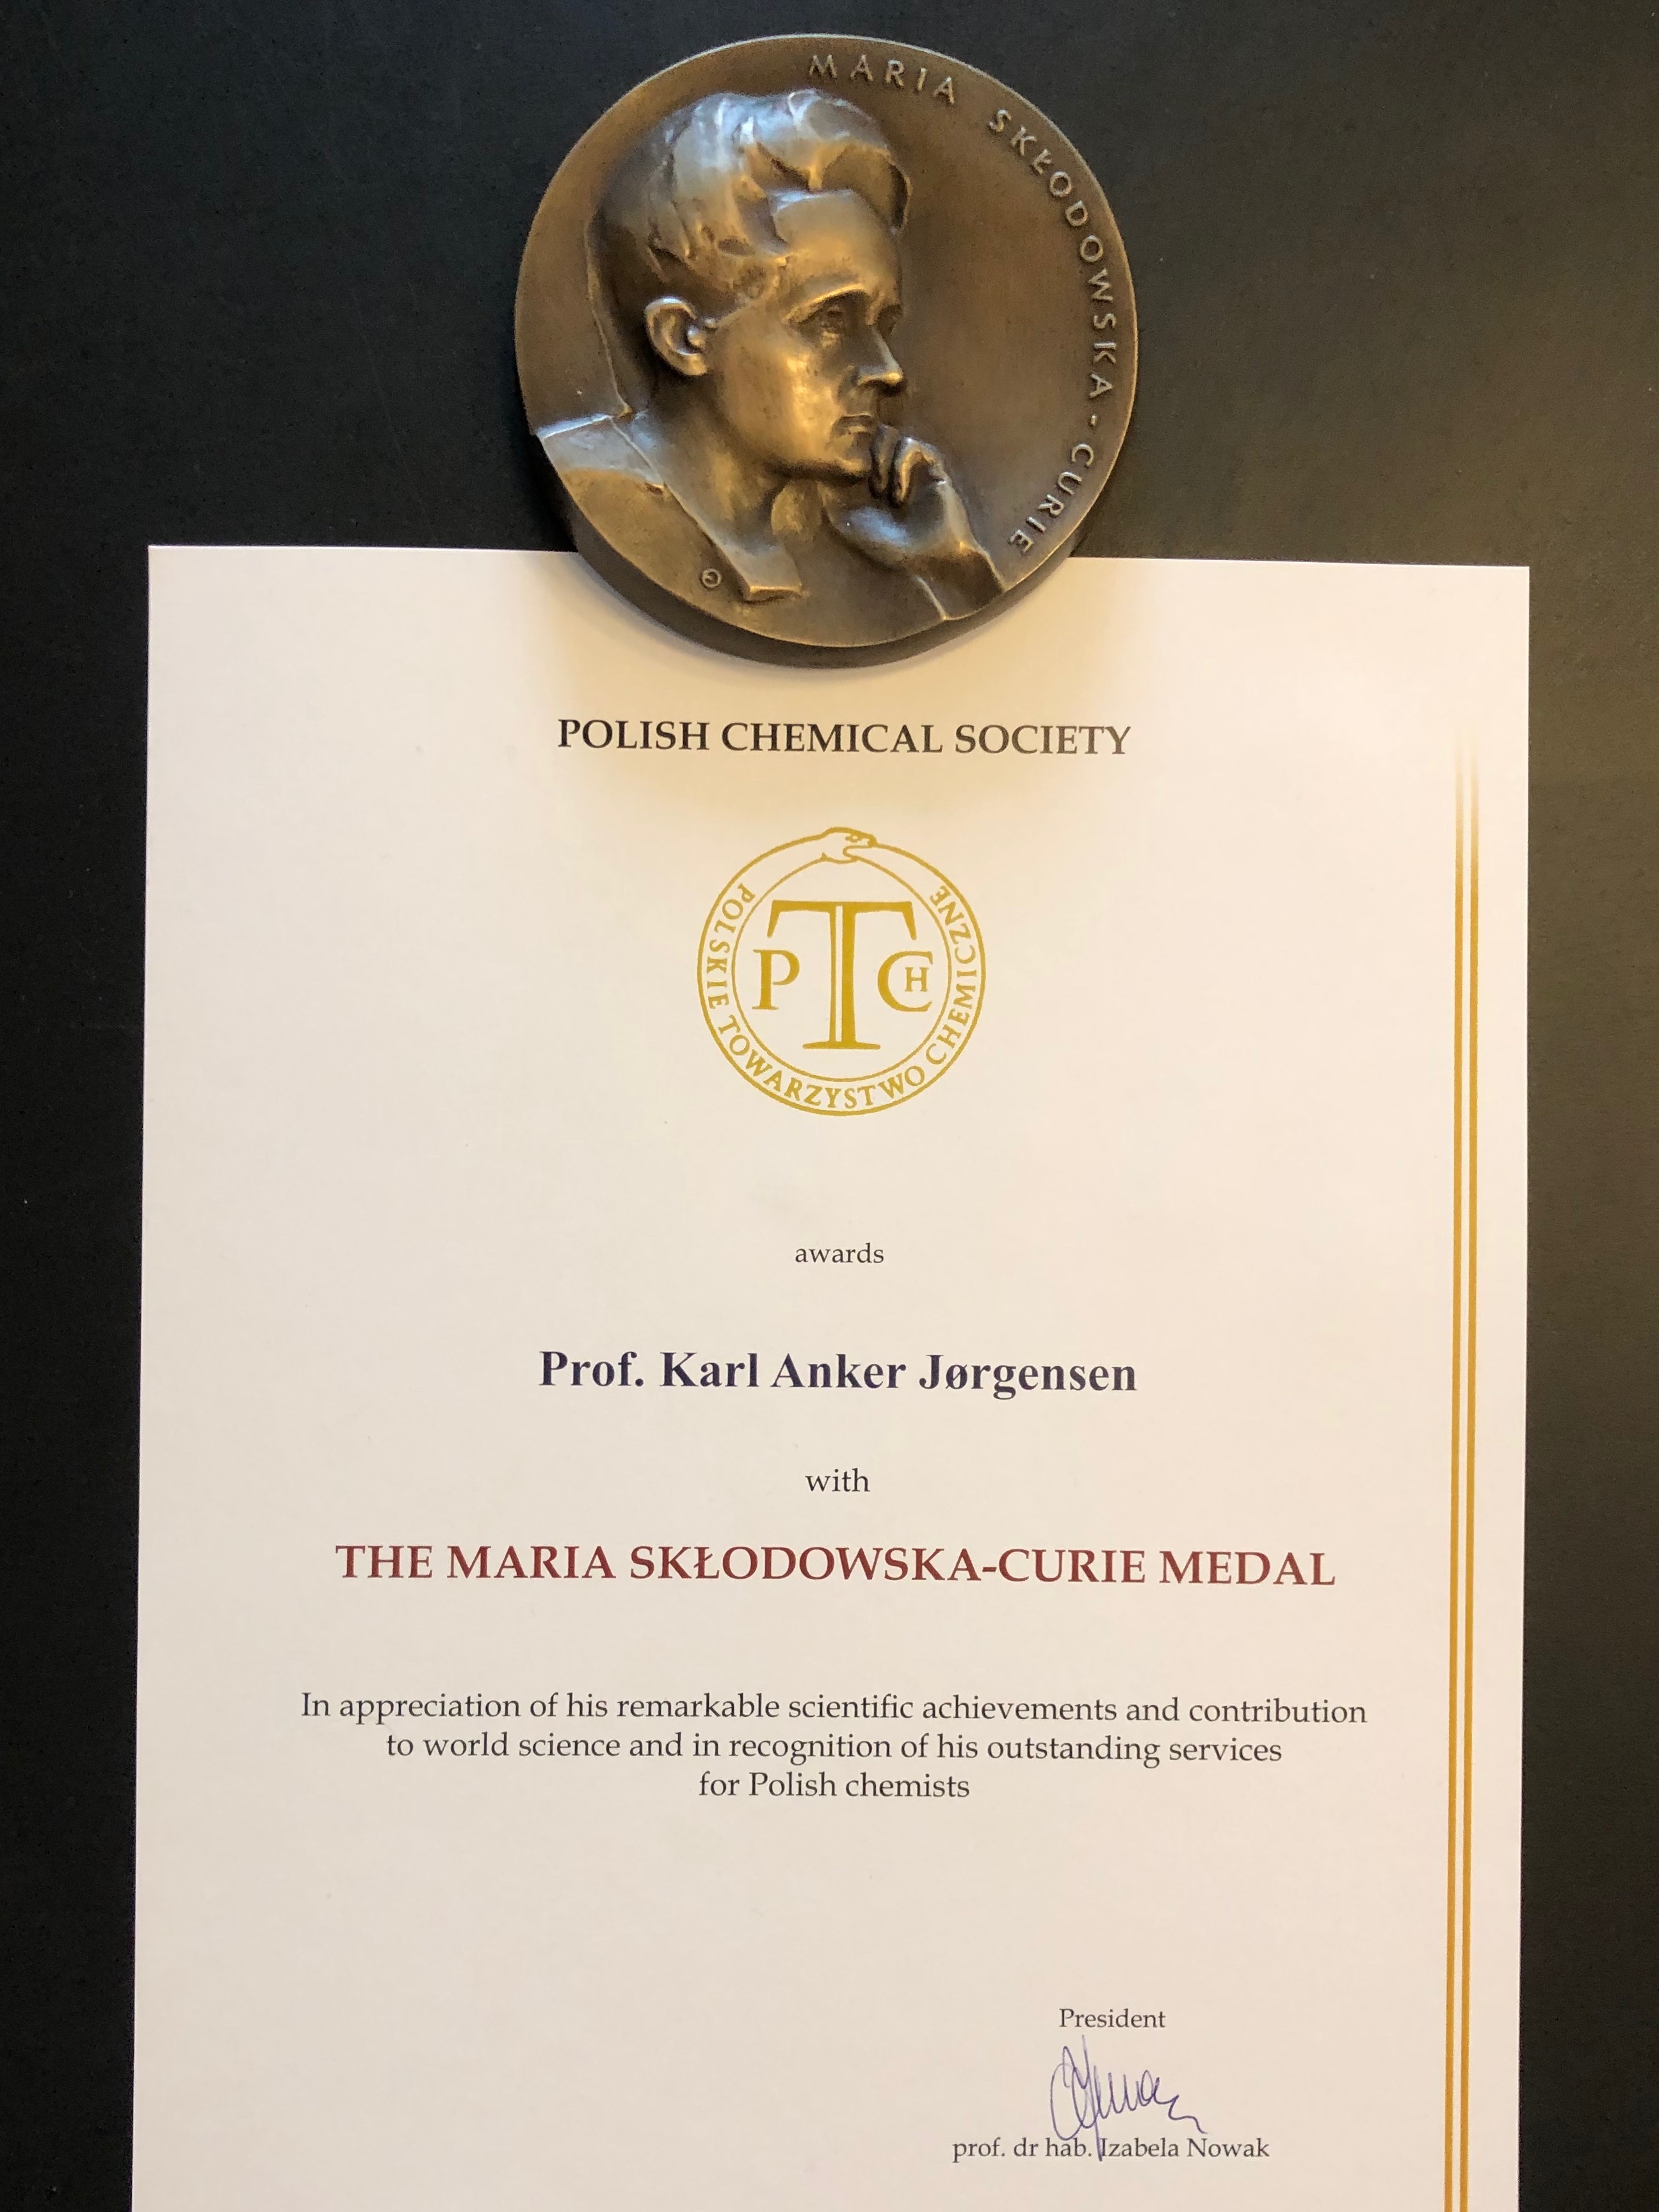 Group on Twitter: "Karl Anker is to join Hoffmann, Ada Yonath, Ben Feringa and other great scientists in receiving the Medal from the Polish Chemical Society. Congratulations from